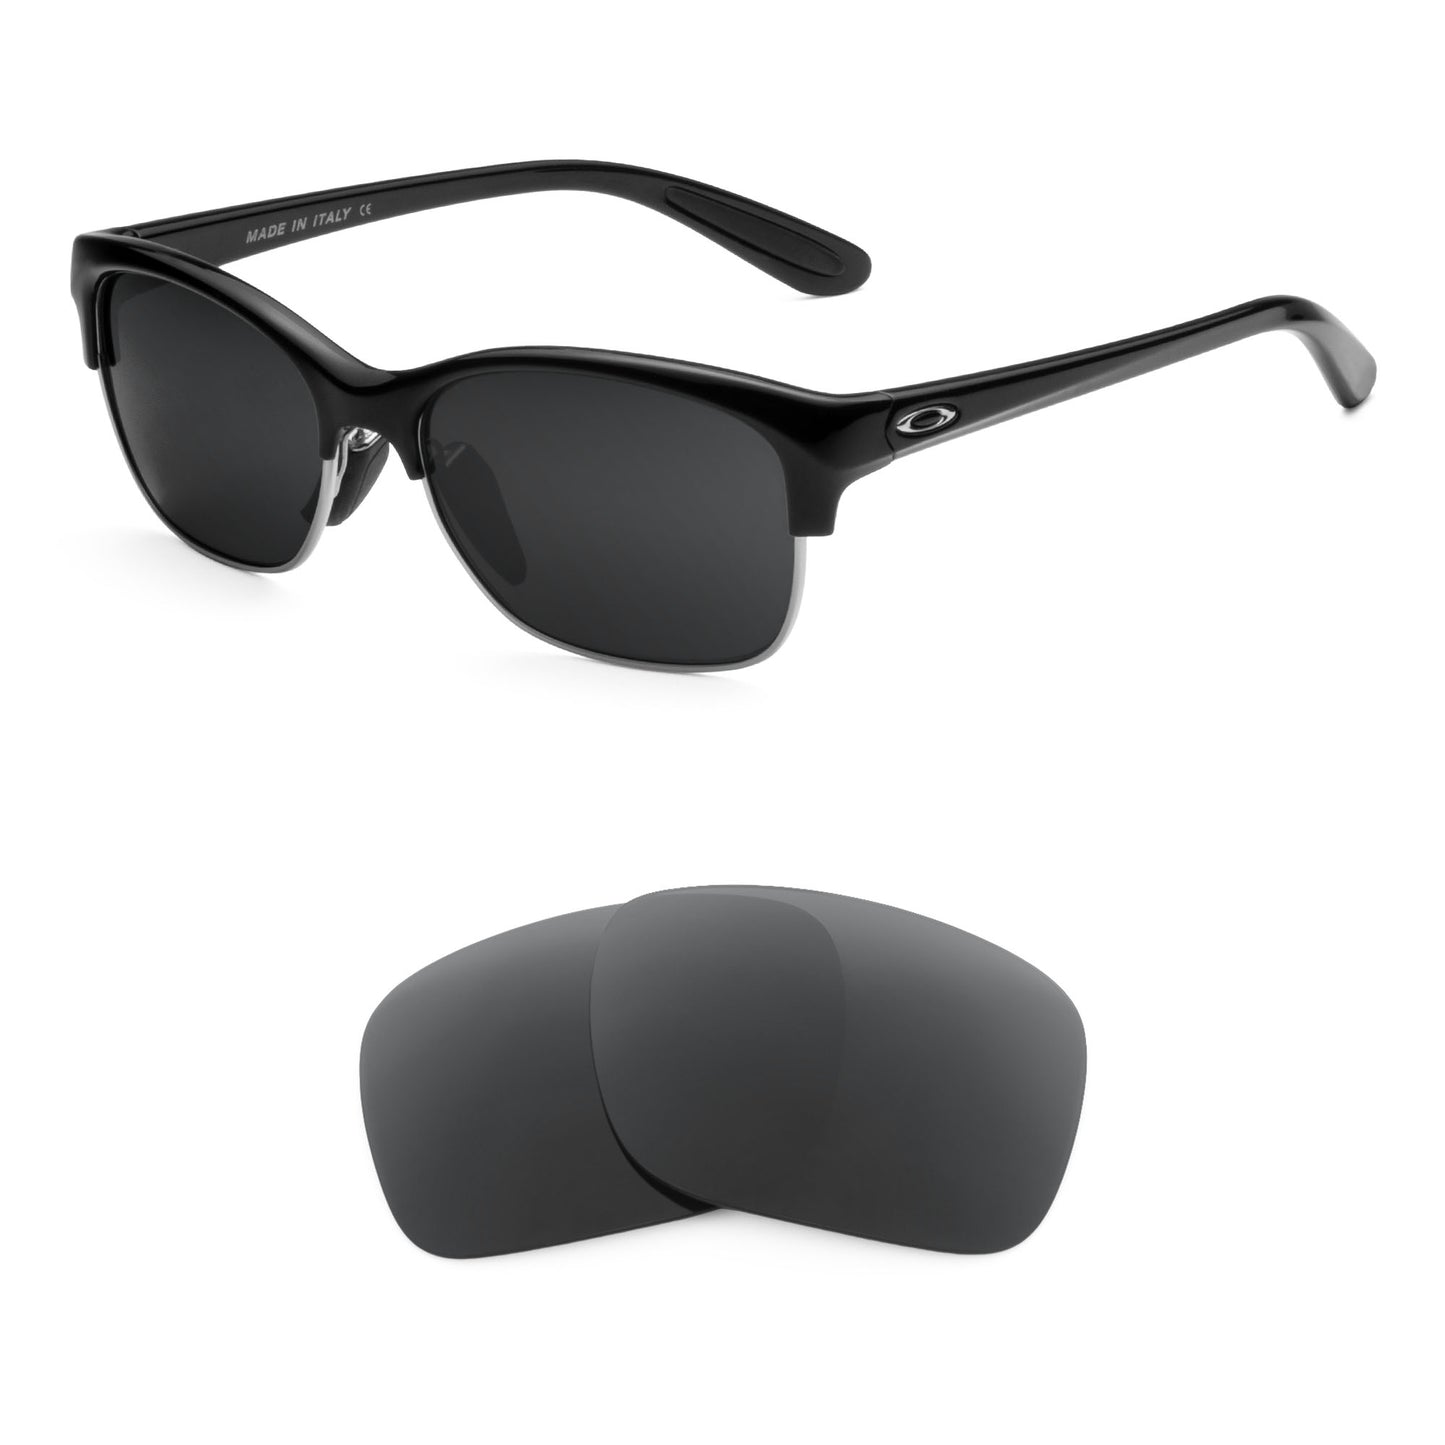 Oakley RSVP sunglasses with replacement lenses